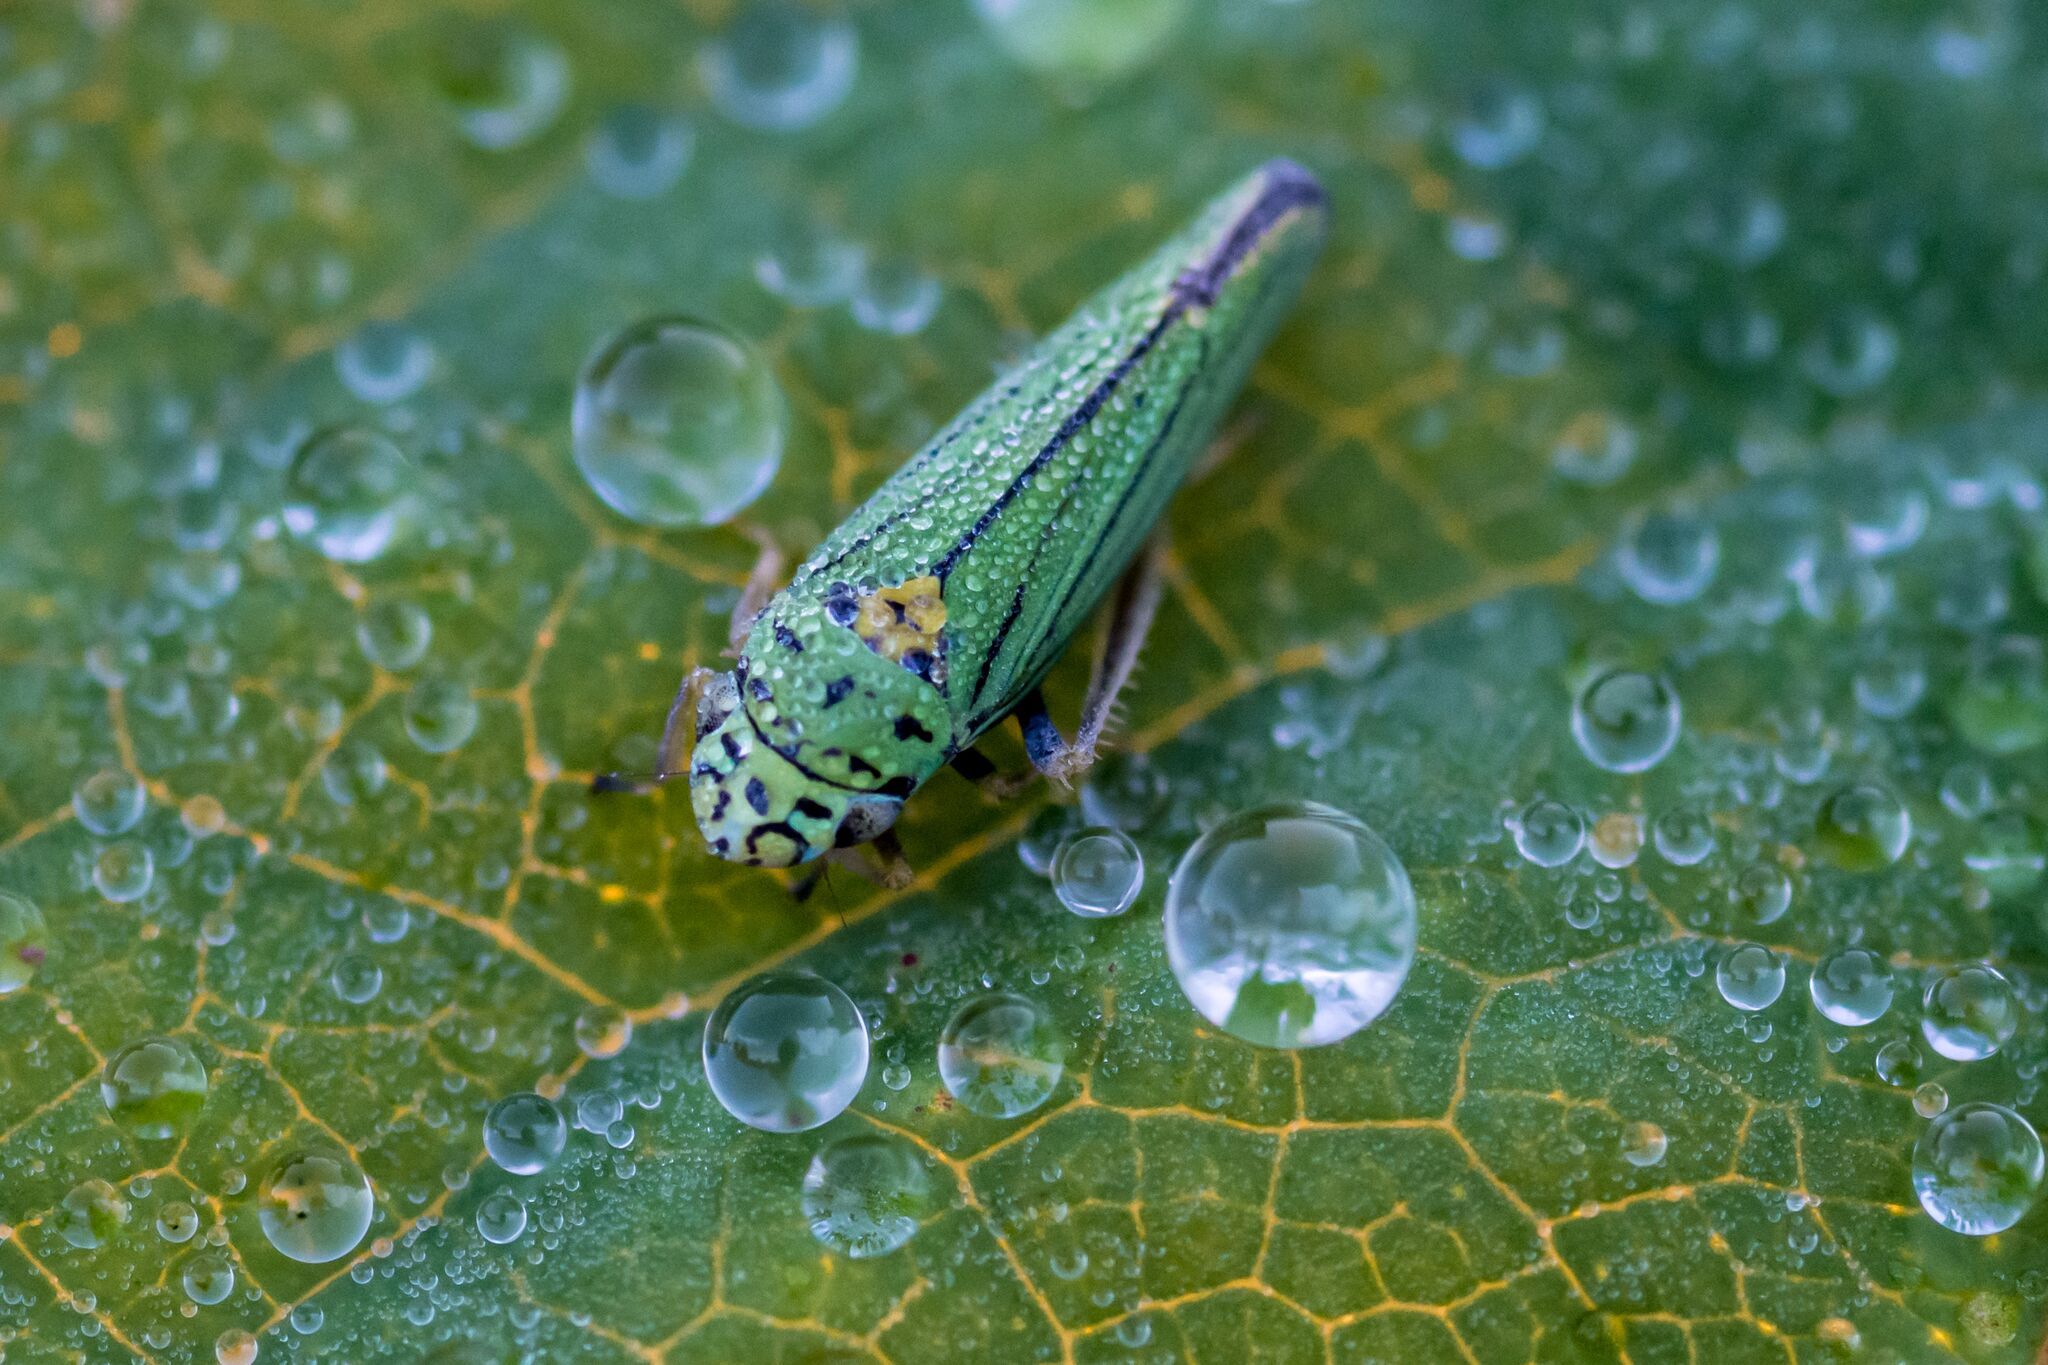 TECHNICAL: Aphid on A Leaf